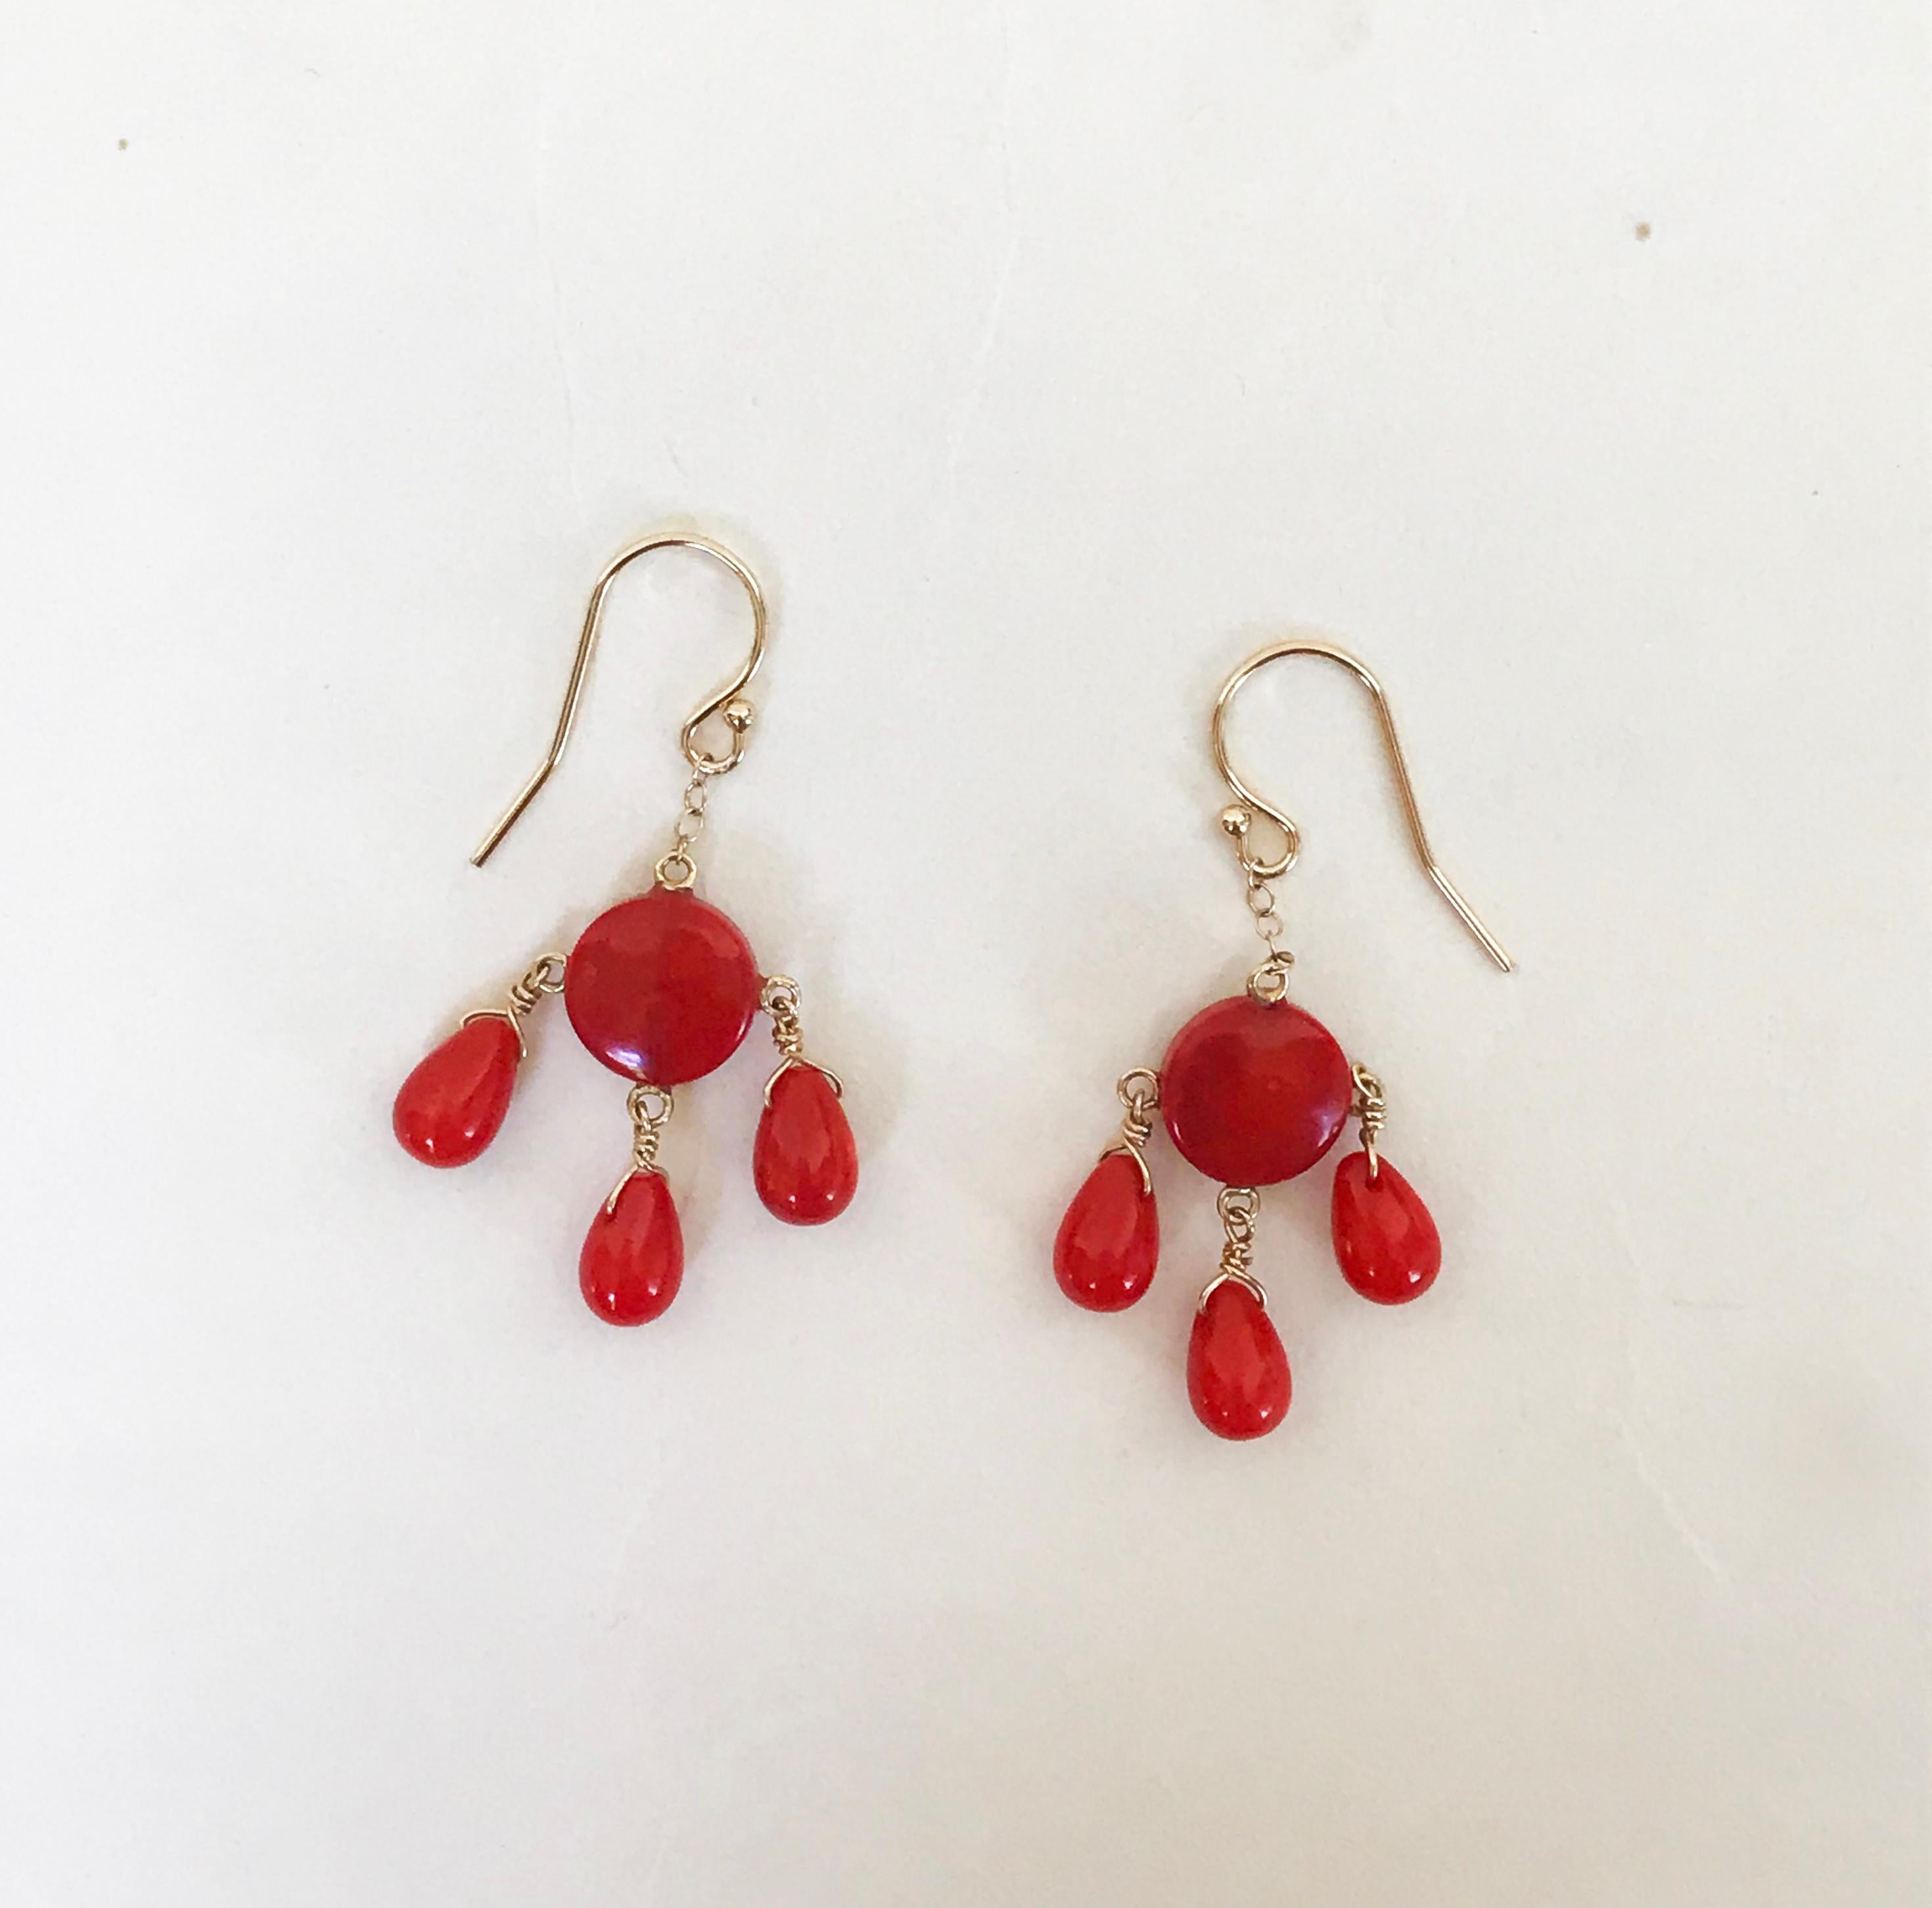 Marina J. presents these beautiful coral earrings with 14k yellow gold wiring and hook. The earrings are striking with the rich red coral drop beads. Highlighting the stones are 14k yellow gold wiring and hook. The earrings hang at 1.5 inches to